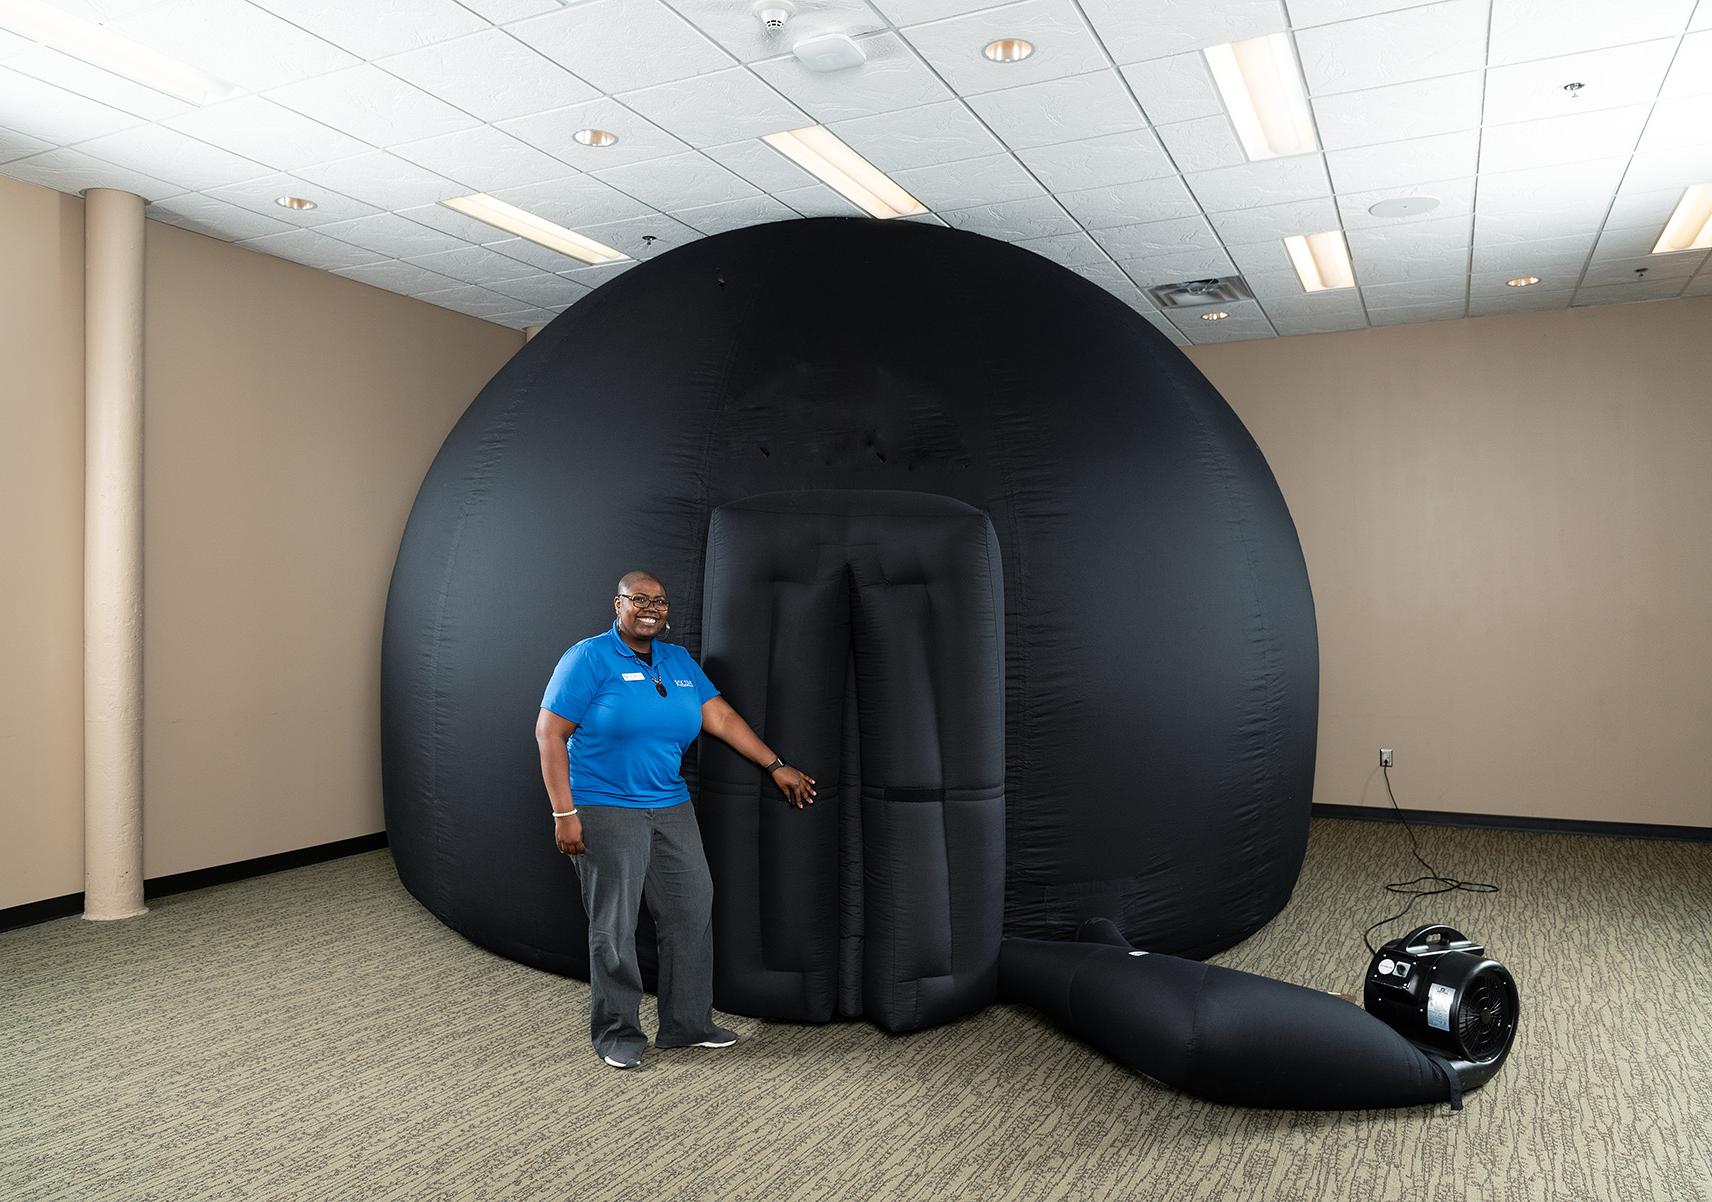 Woman in blue shirt stands in front of entrance to large black inflatable dome